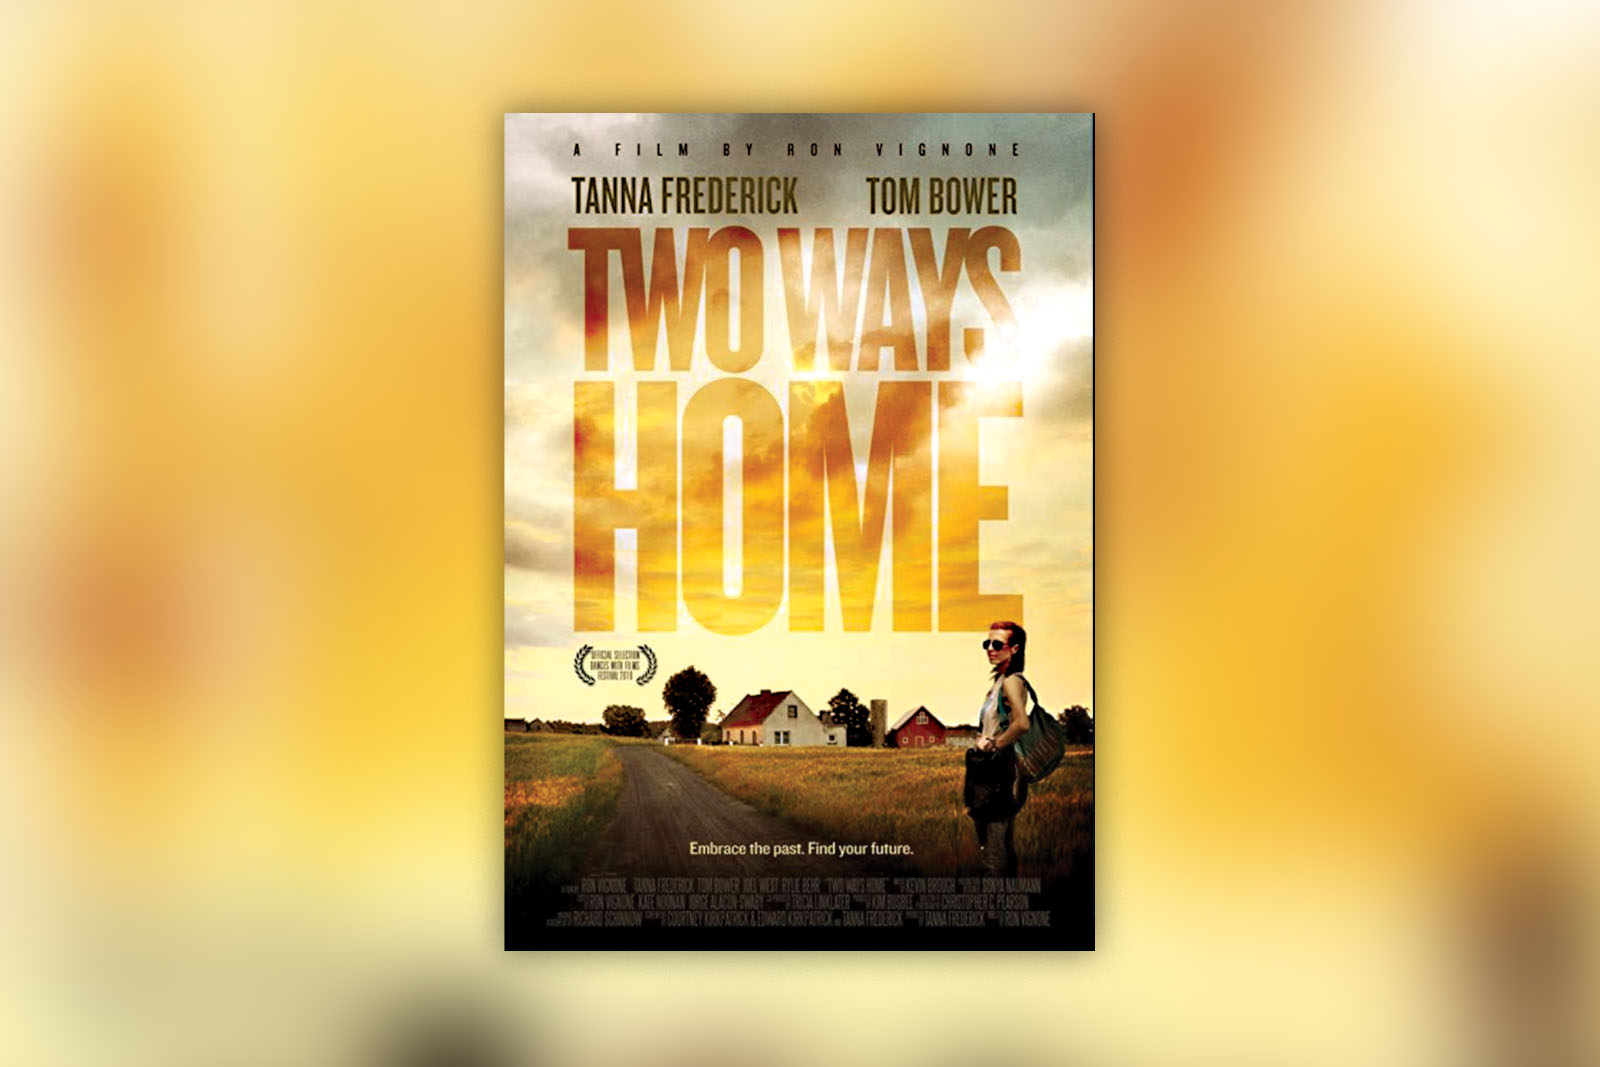 two ways home movie review